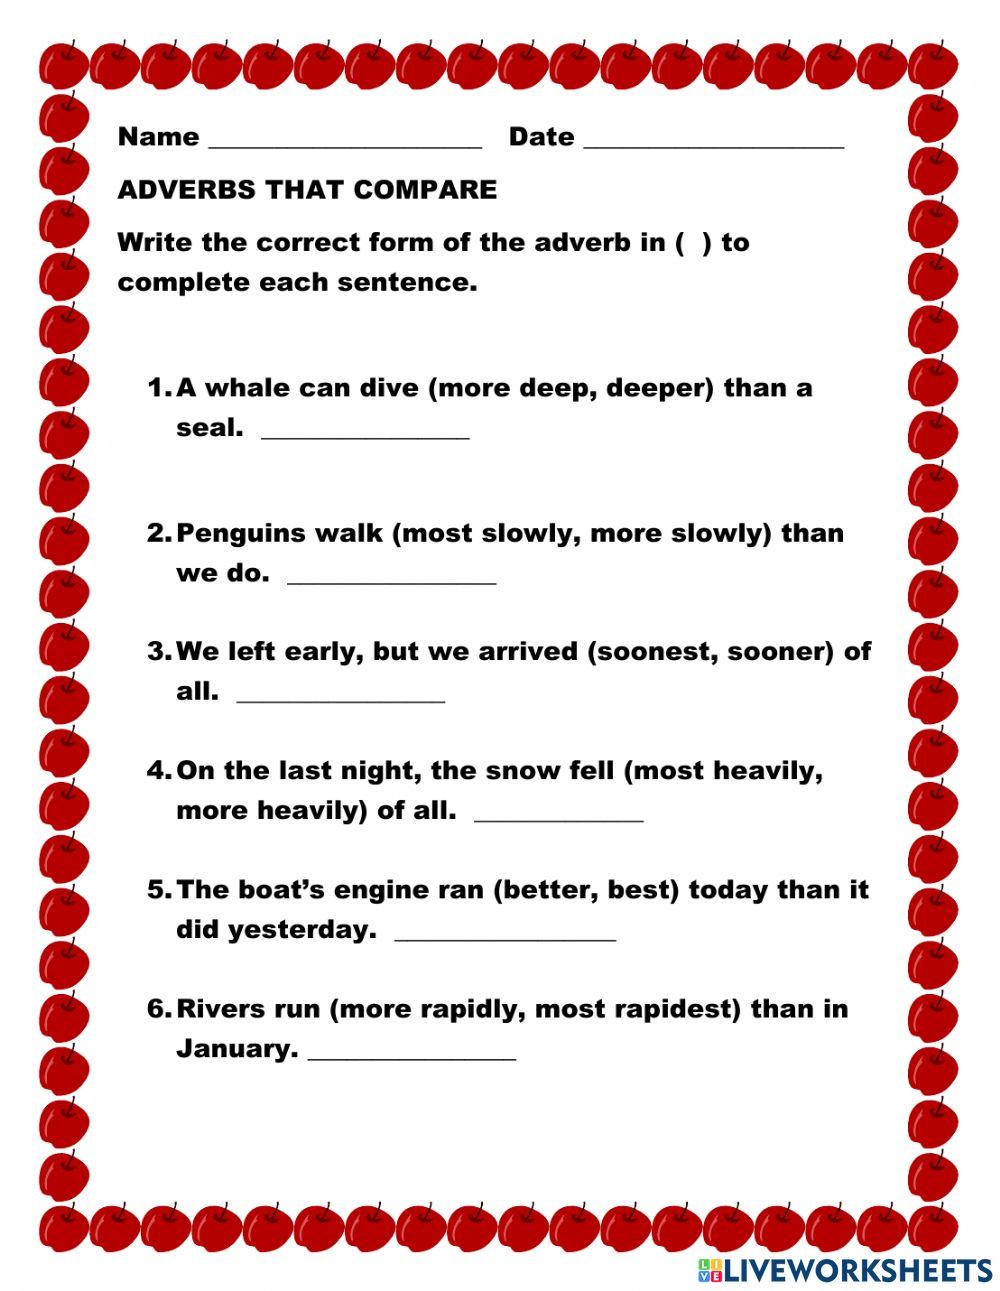 adverbs-that-compare-interactive-worksheet-live-worksheets